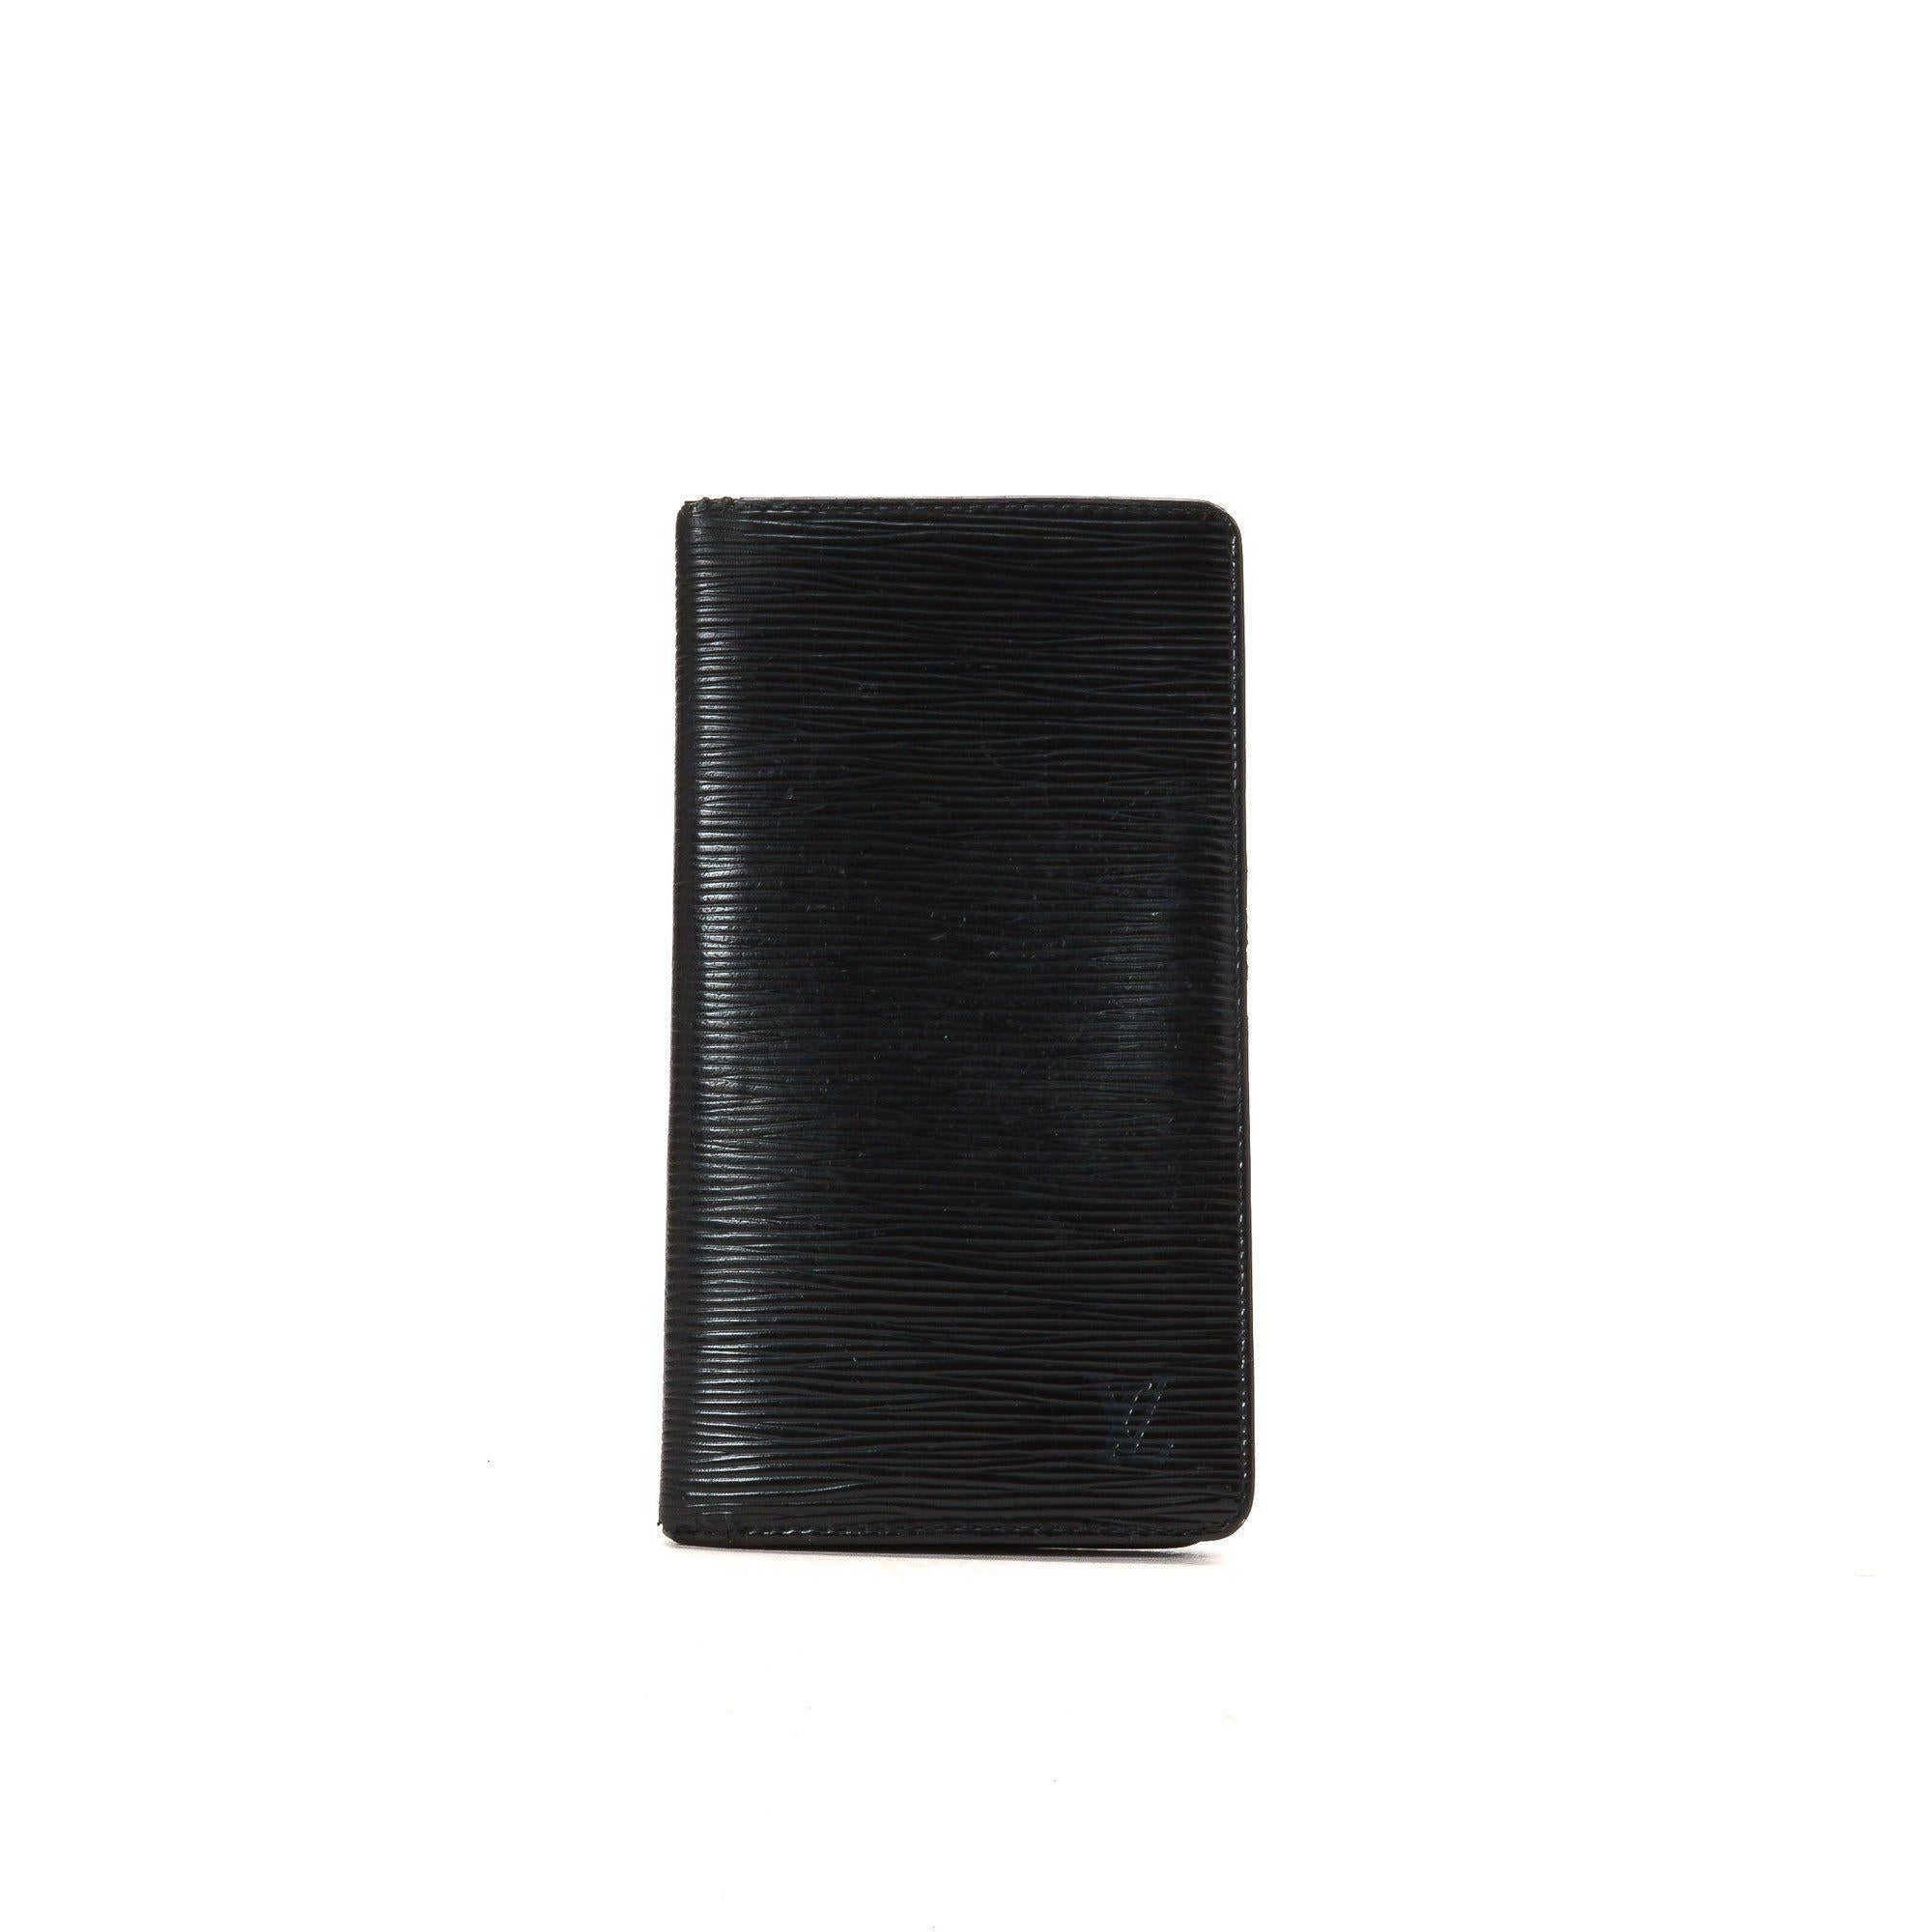 Louis Vuitton Black Monogram Breast Pocket Wallet with gold-tone hardware, tan vachetta leather trim, zipper closure.



29438MSC

Measurements:
 Length: 17.2 in / 44 cm
 Width: 5 in / 13 cm
 14.1 in / 36 cm

Condition: Pre-Owned 

Good overall,